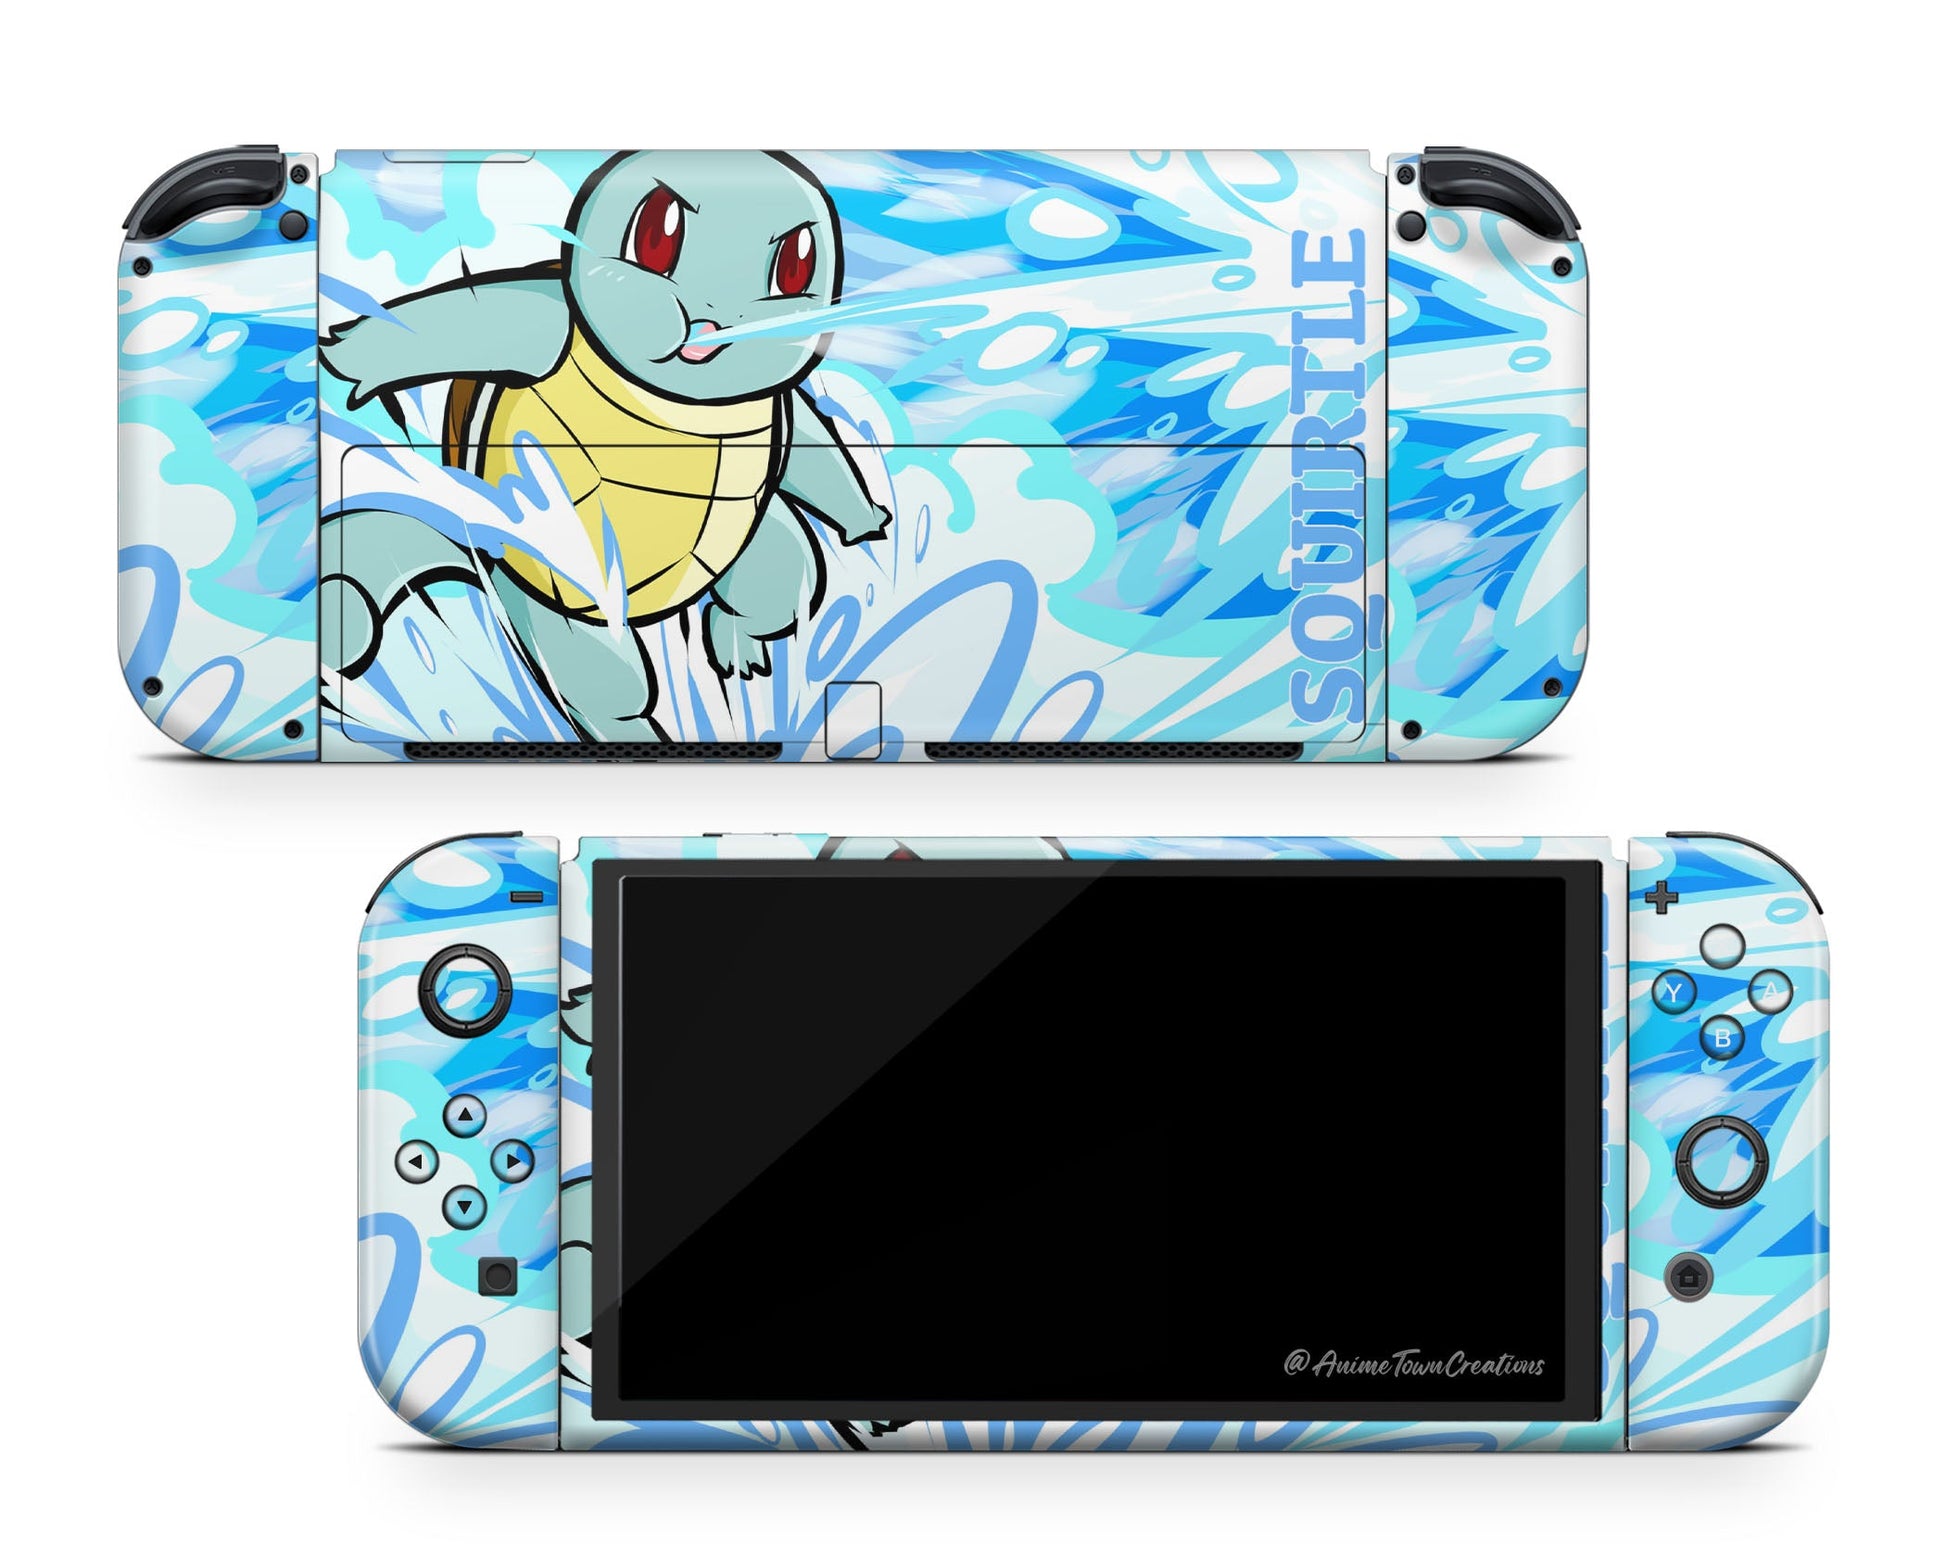 Anime Town Creations Nintendo Switch OLED Pokemon Squirtle Vinyl only Skins - Anime Pokemon Switch OLED Skin